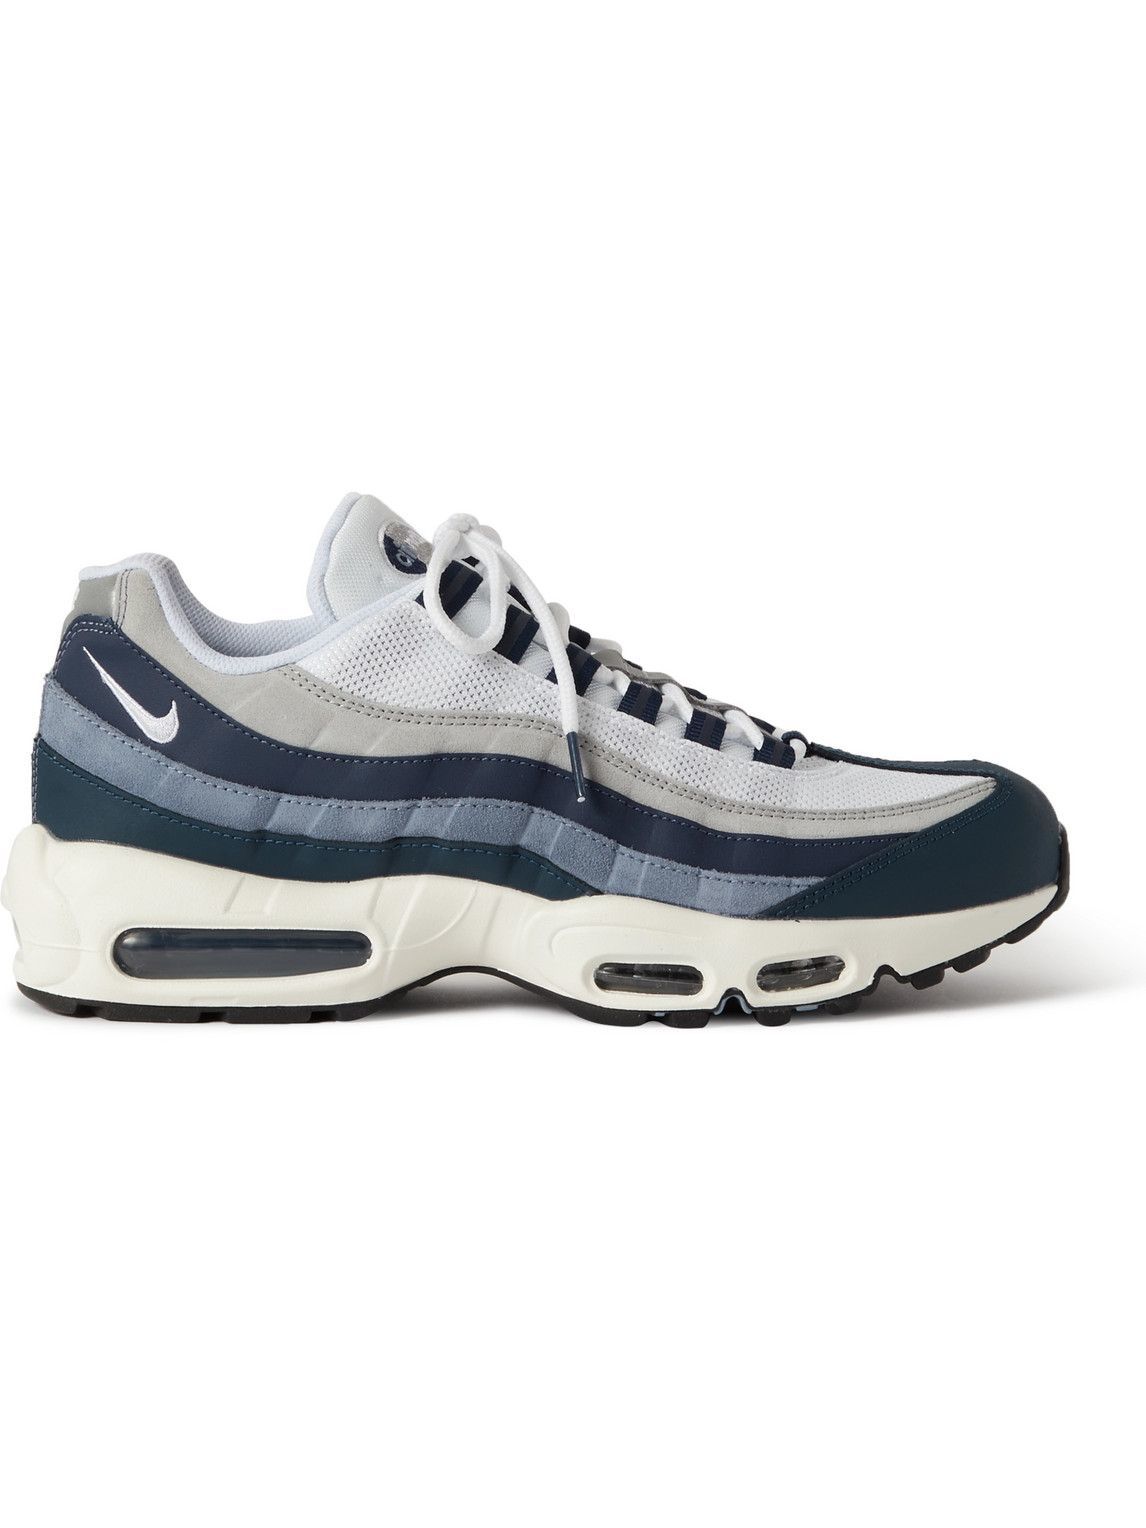 Nike - Air Max 95 Panelled Leather, Suede and Mesh Sneakers - Blue 